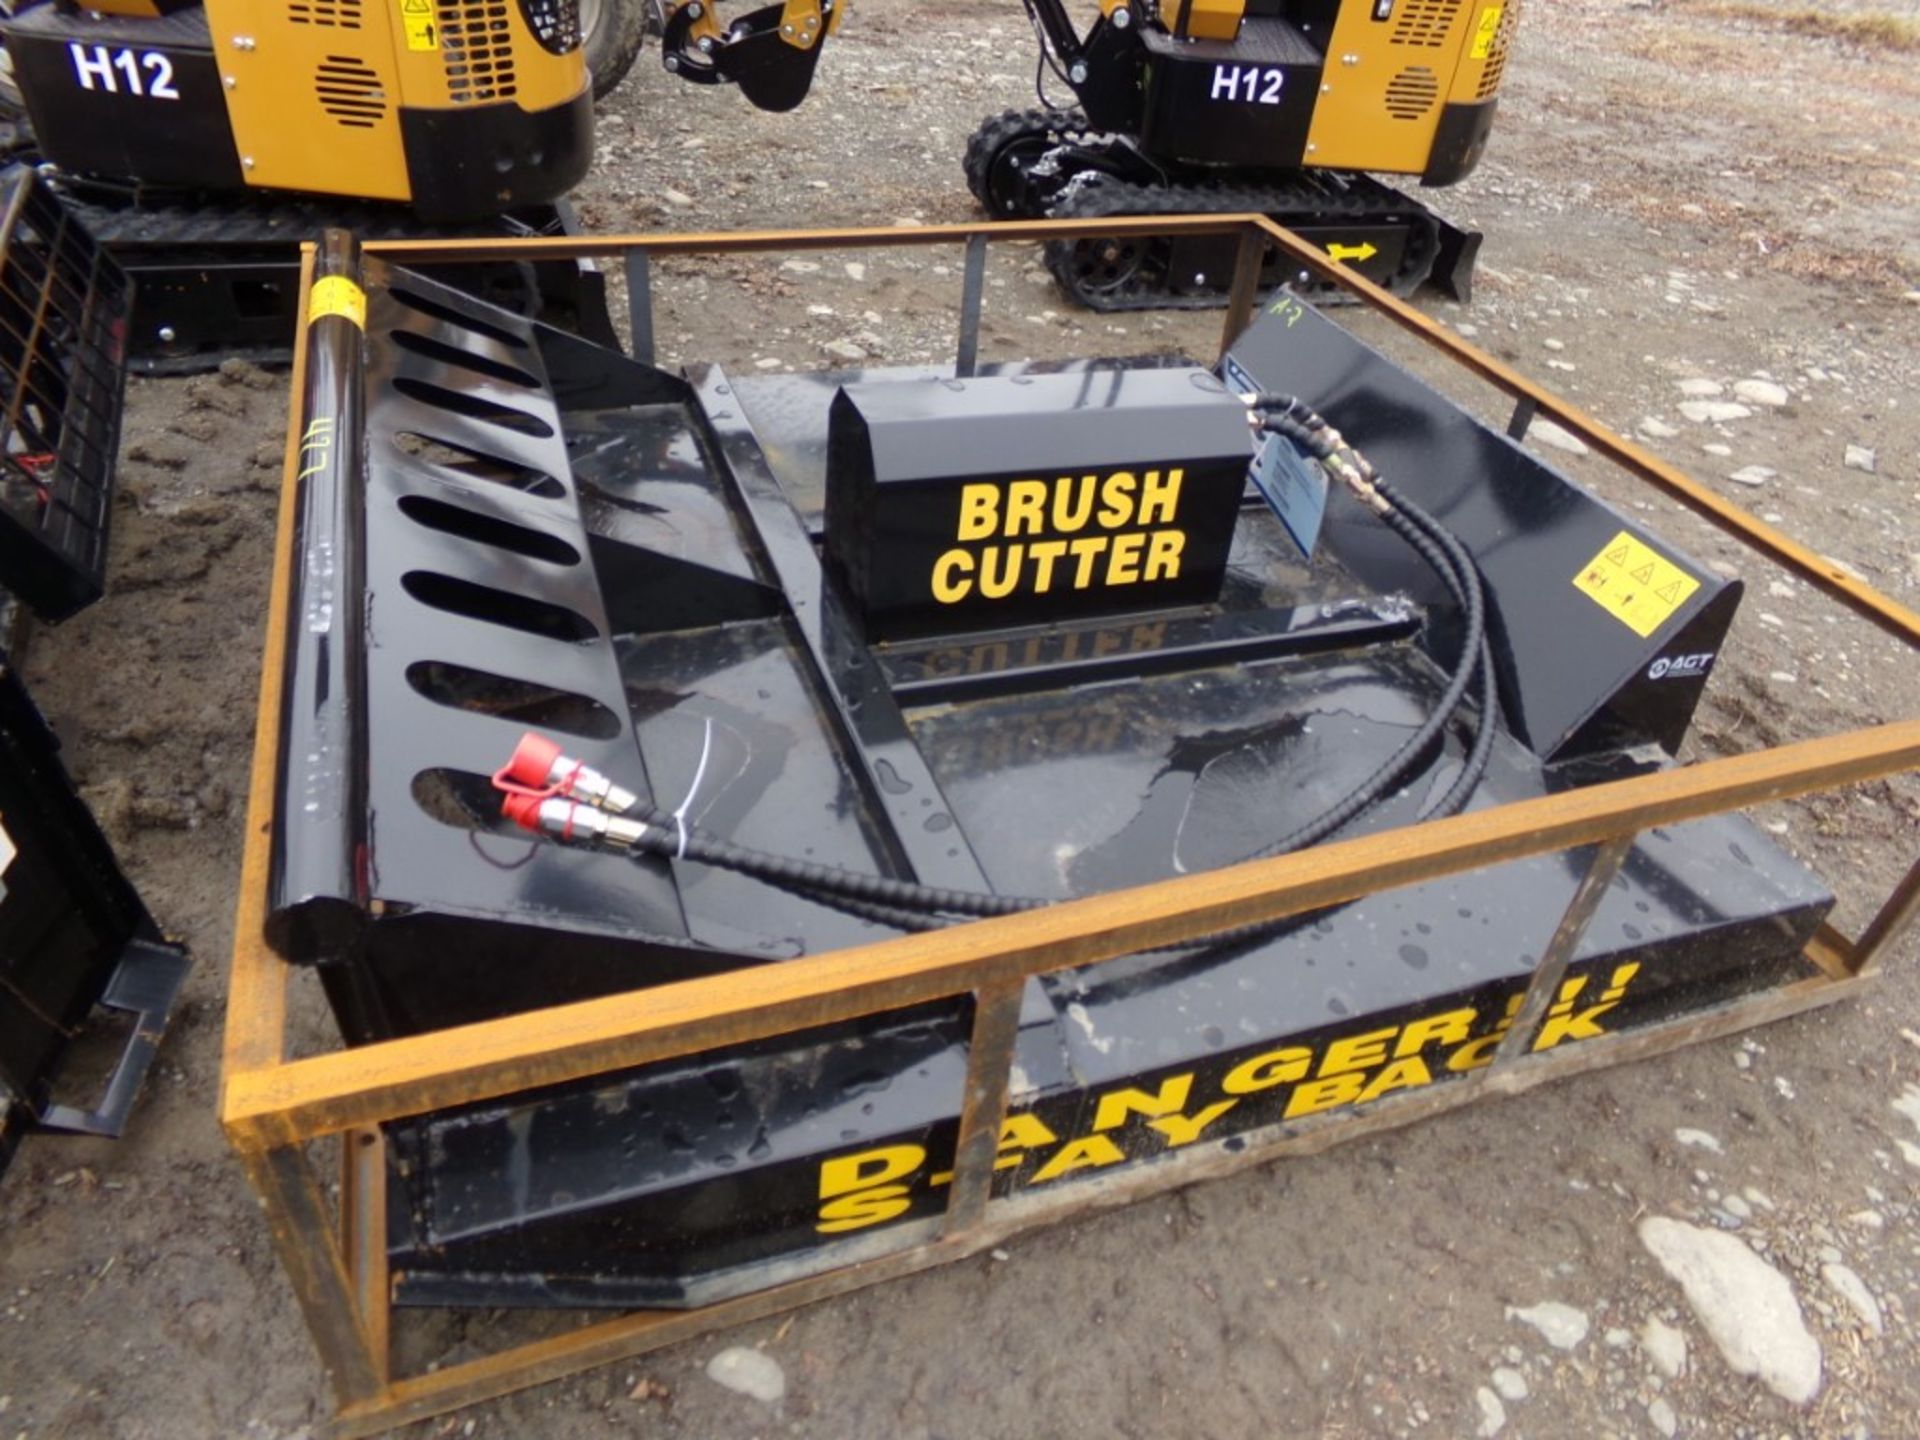 New, AGT 72'' Skid Steer Brush Cutter, Put Oil In Gear Box Before Using - Image 2 of 2